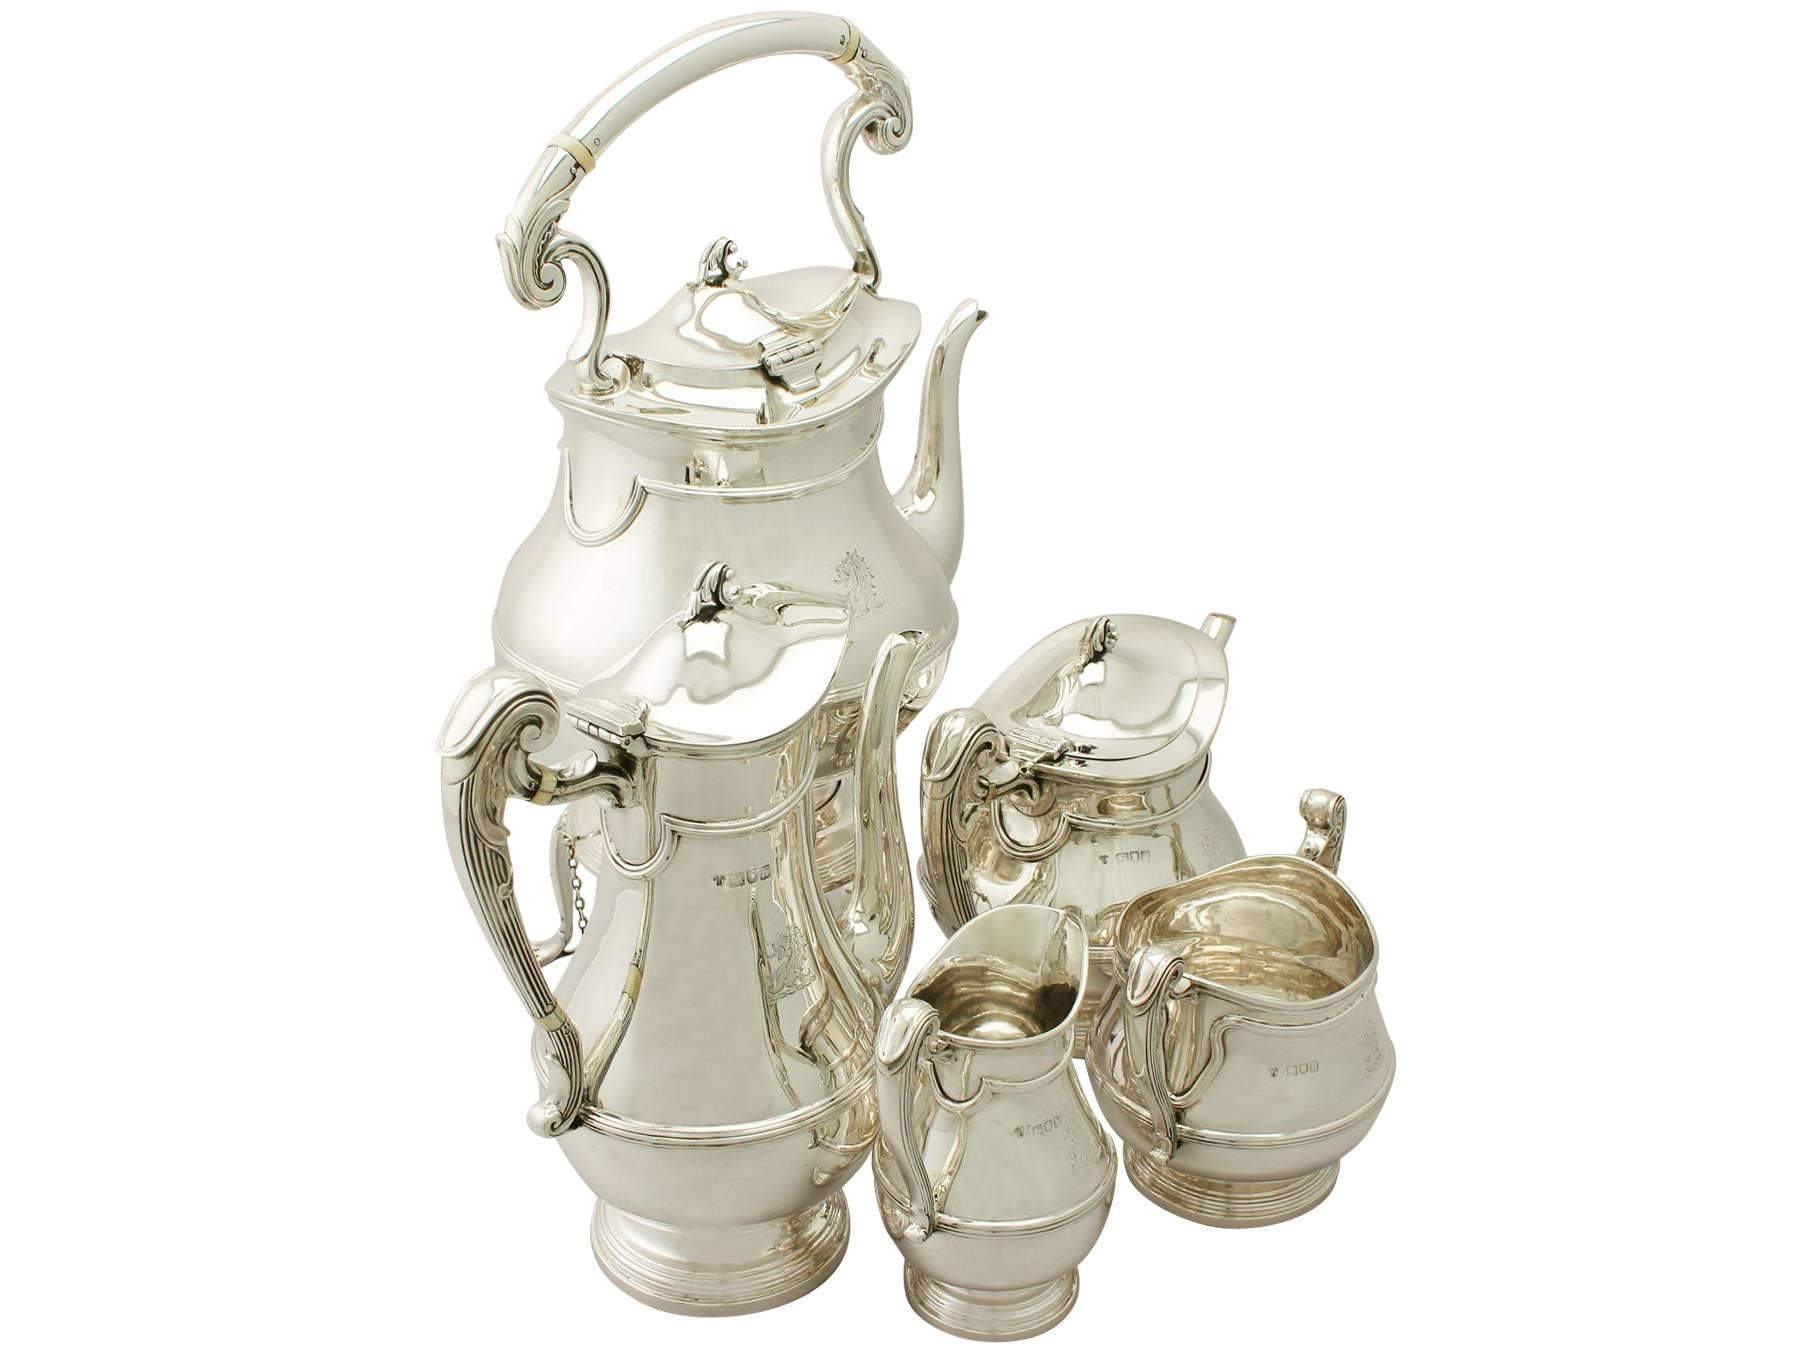 A magnificent, fine and impressive antique Edwardian English sterling silver five-piece tea and coffee set/service made in the Art Nouveau style, part of our silver teaware collection.

This magnificent antique Edwardian sterling silver five-piece